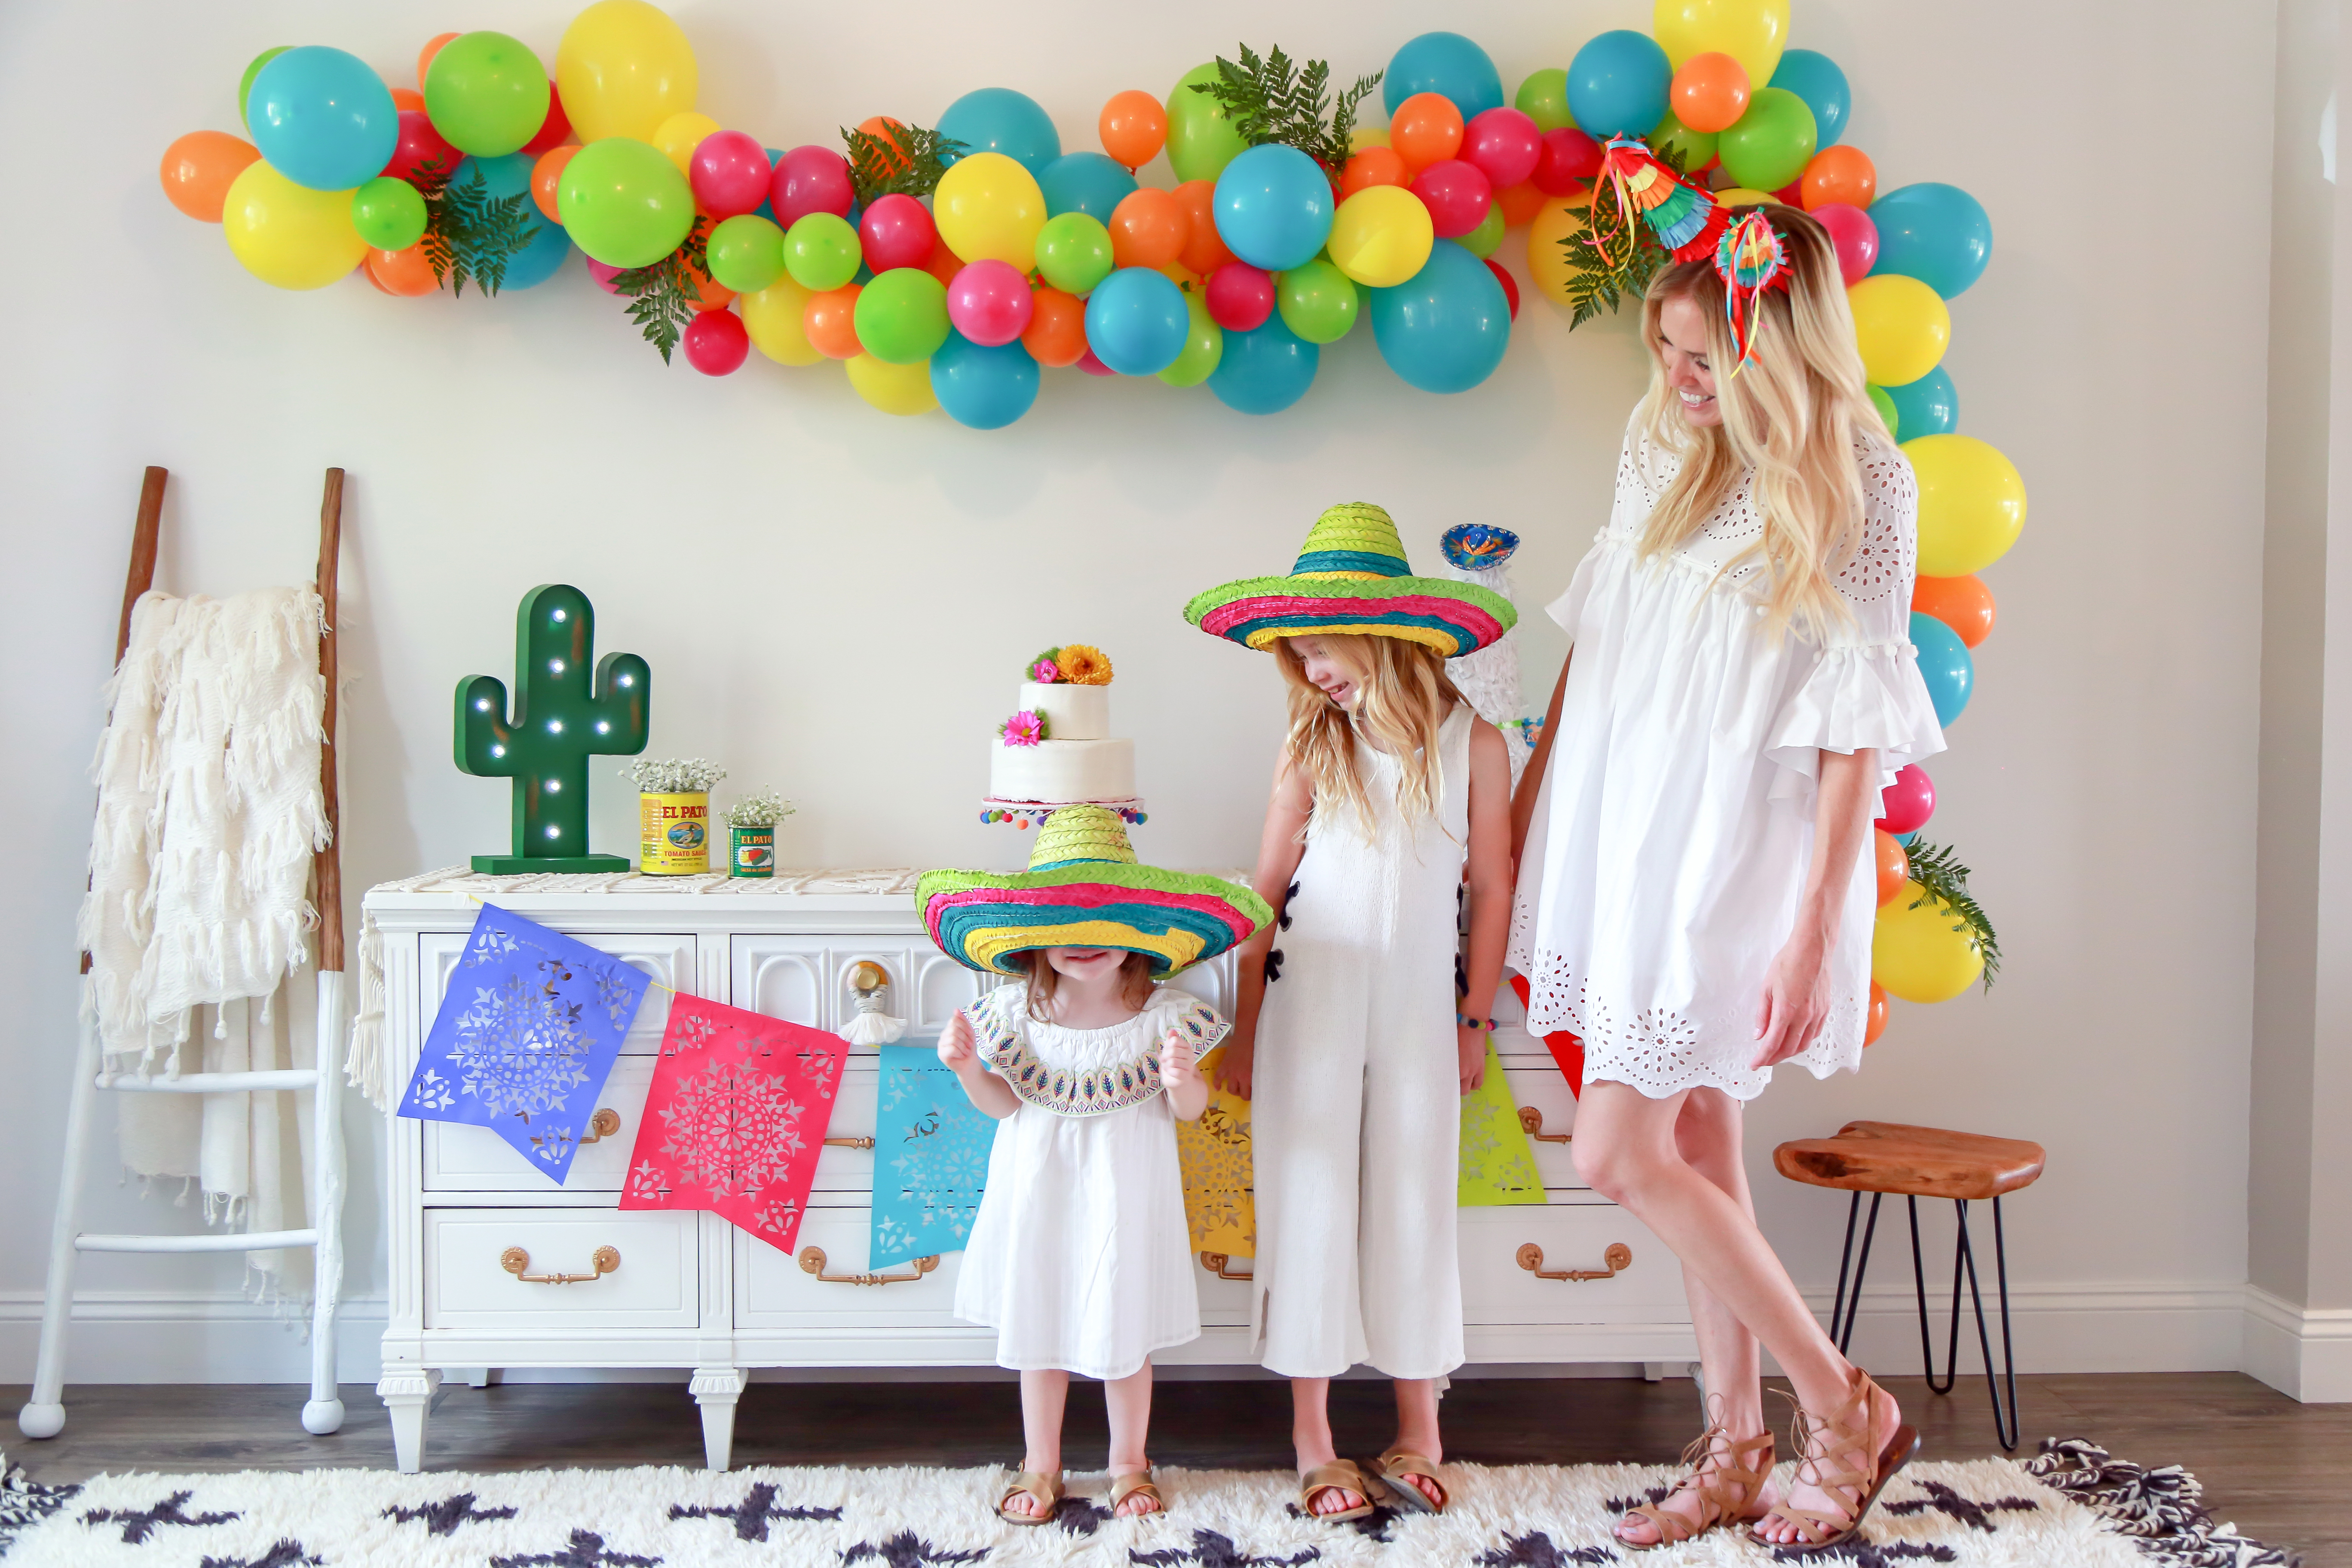 Fiesta inspired party, Mexican celebration, bright party decor